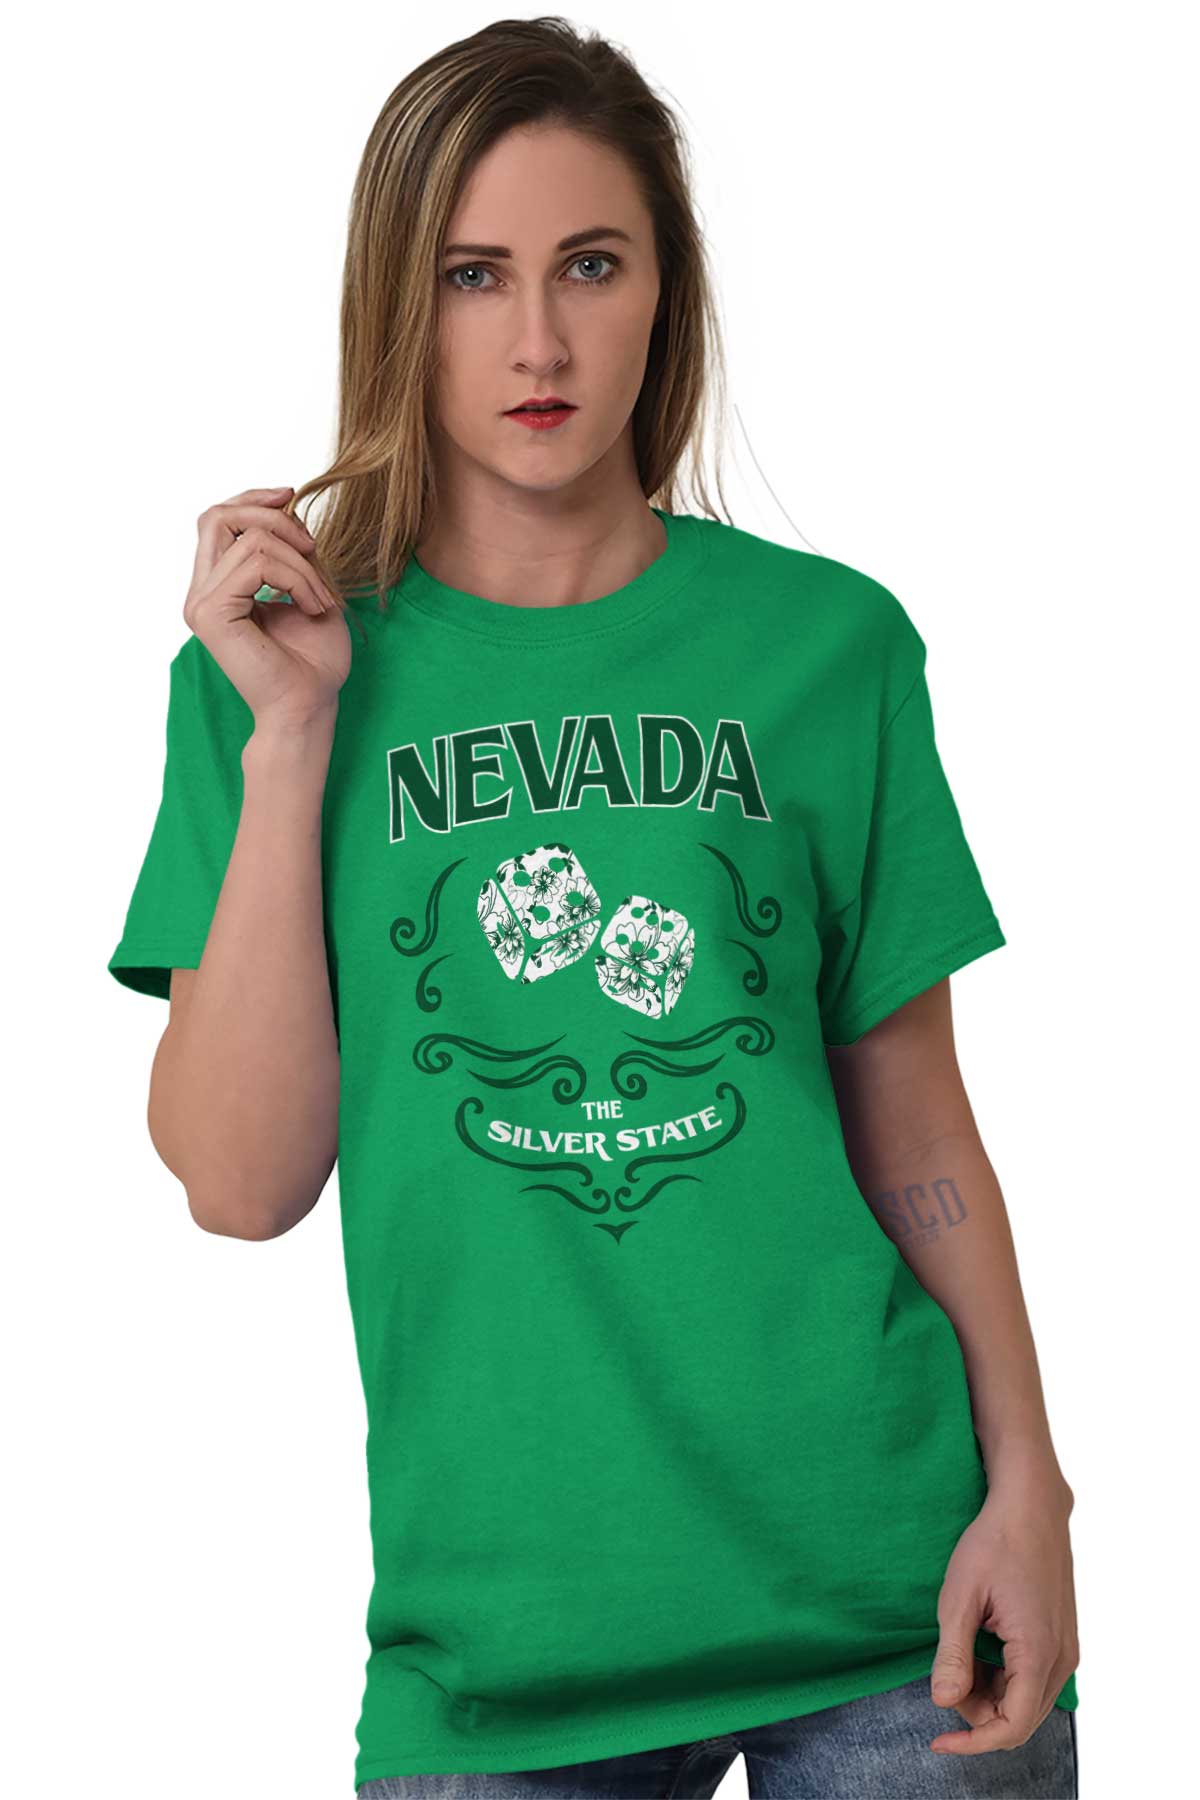 Cute Nevada Lucky Dice Floral NV Women's Graphic T Shirt Tees Brisco Brands 3X - image 4 of 6